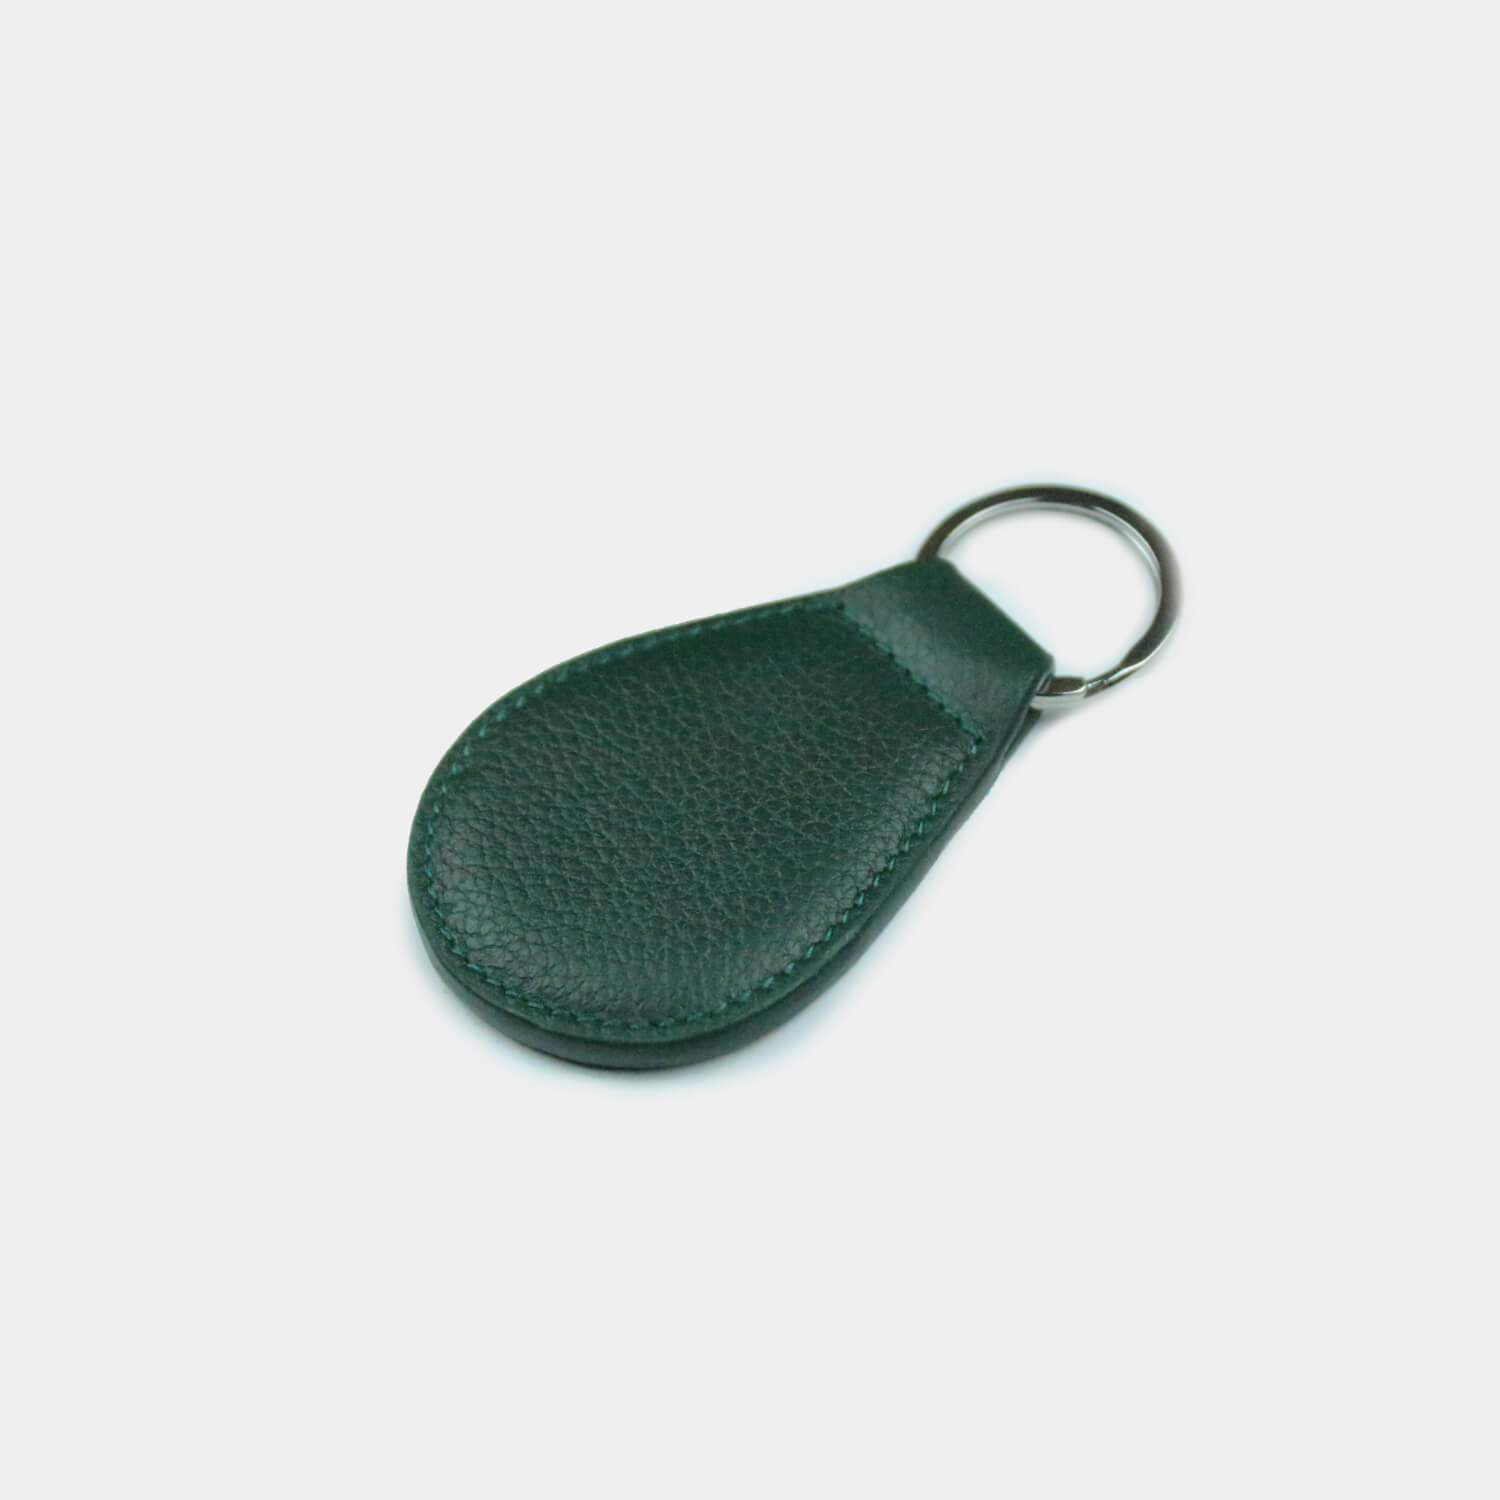 Fine grain leather pear shaped keyring with gold or silver split ring, branded with your company logo